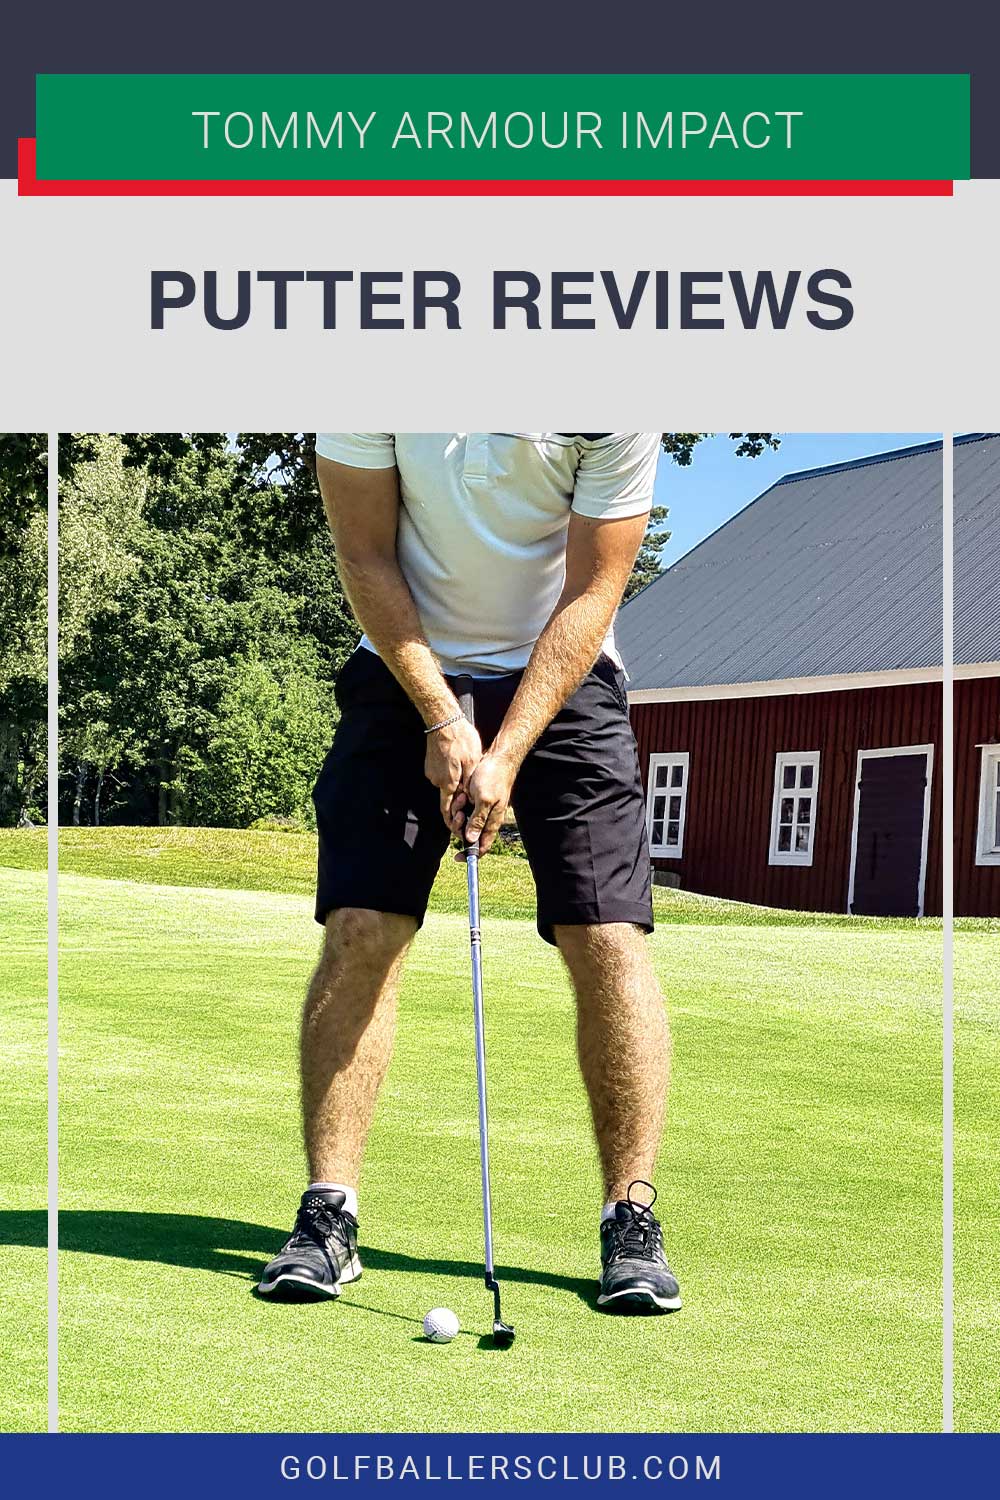 Man in short pants taking a shot - Tommy Armour Impact Putter reviews.